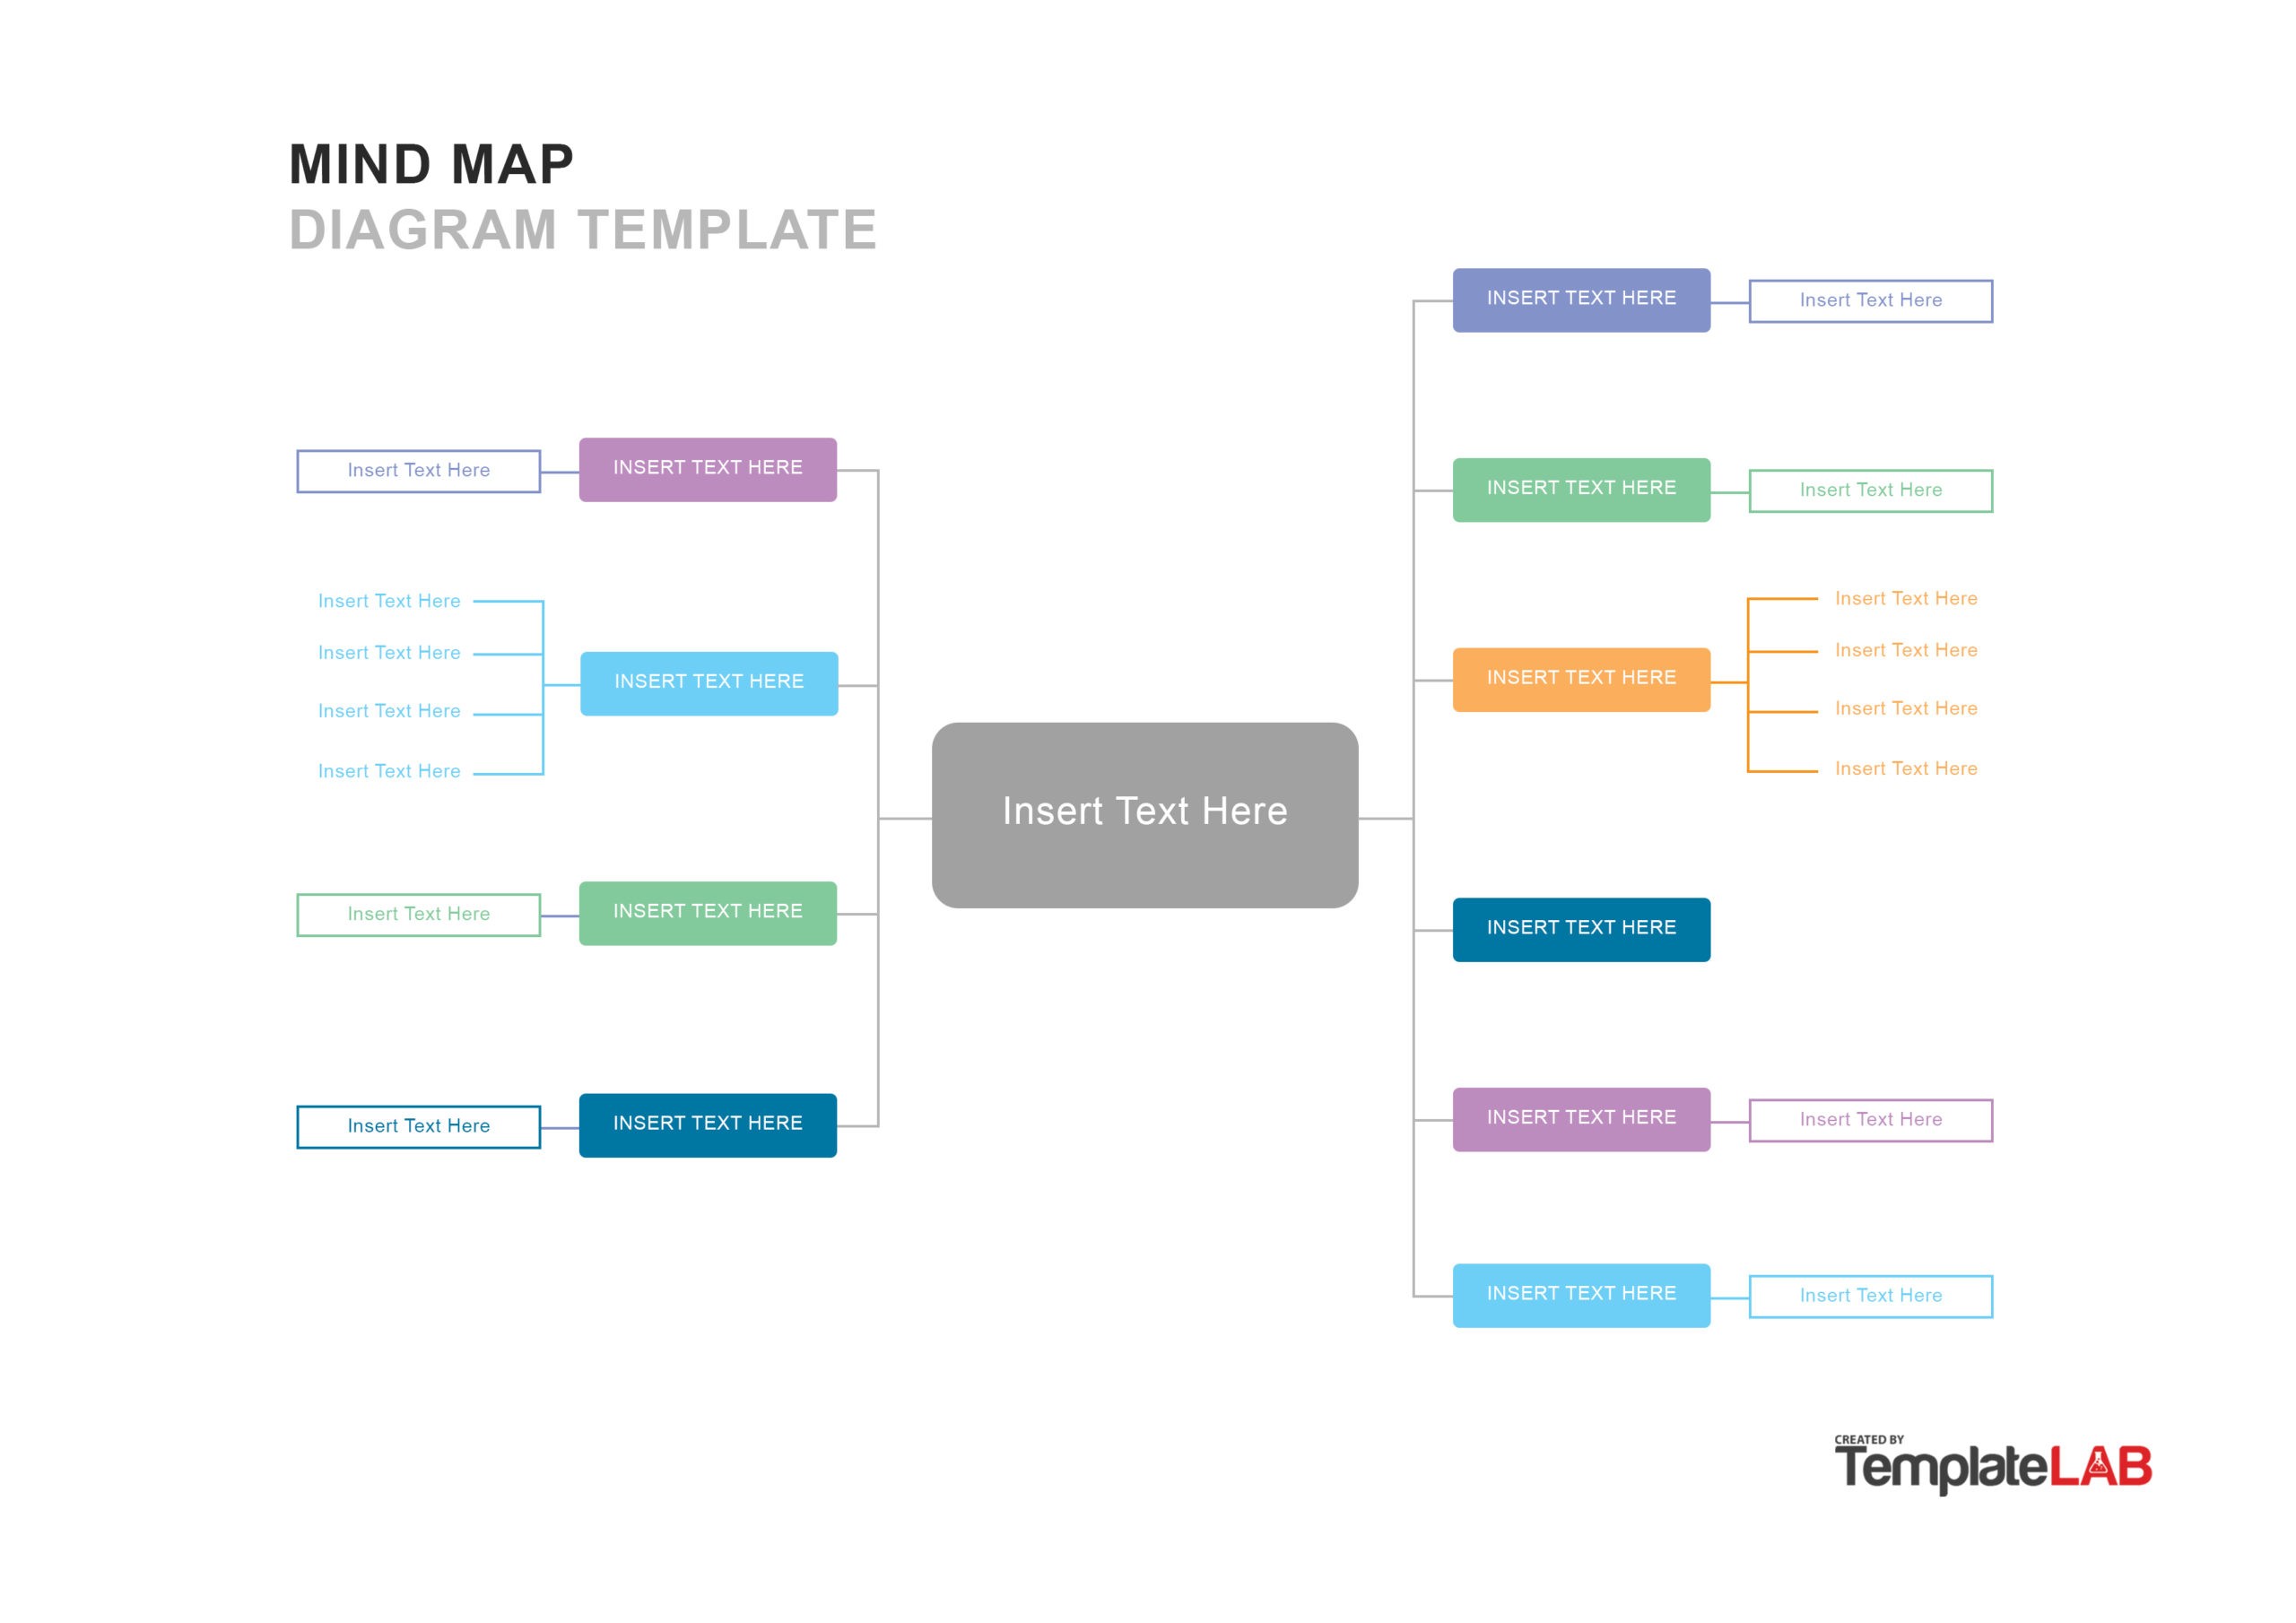 24 Free Mind Map Templates & Examples (Word,Powerpoint,Psd)